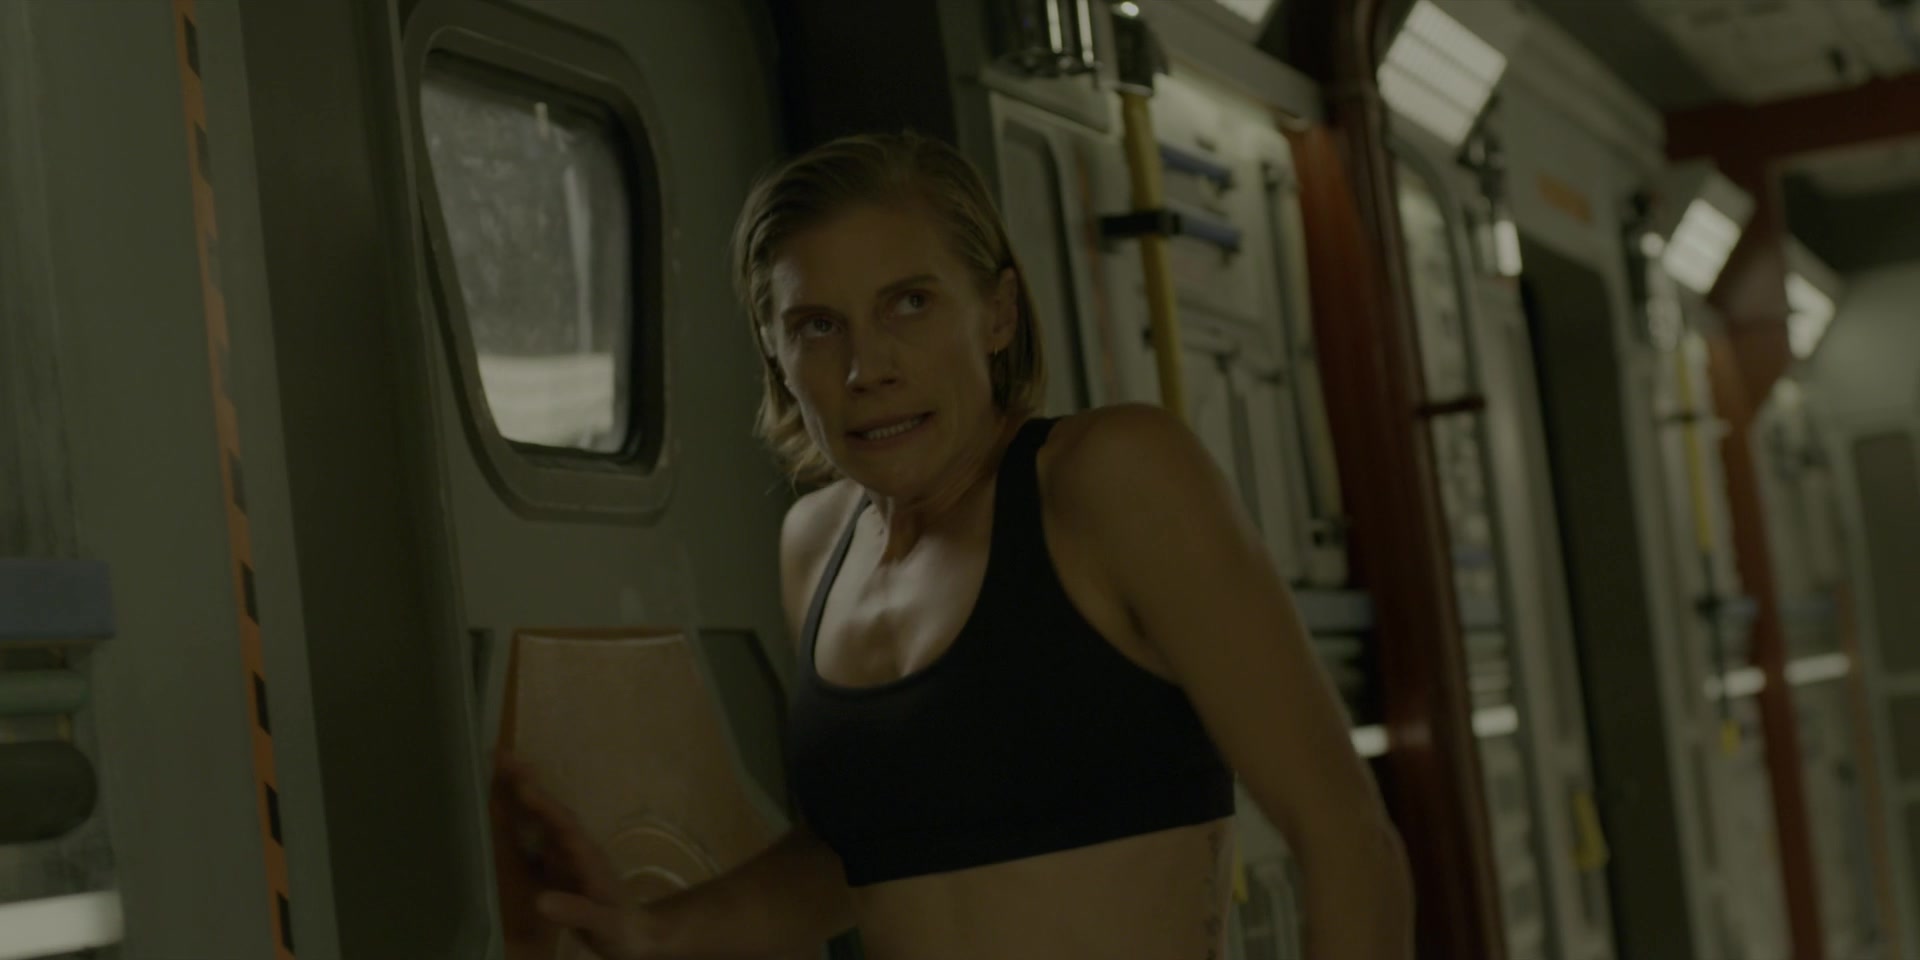 Naked scene Katee Sackhoff nude - Another Life s01e01 (2019) TV show nudity...